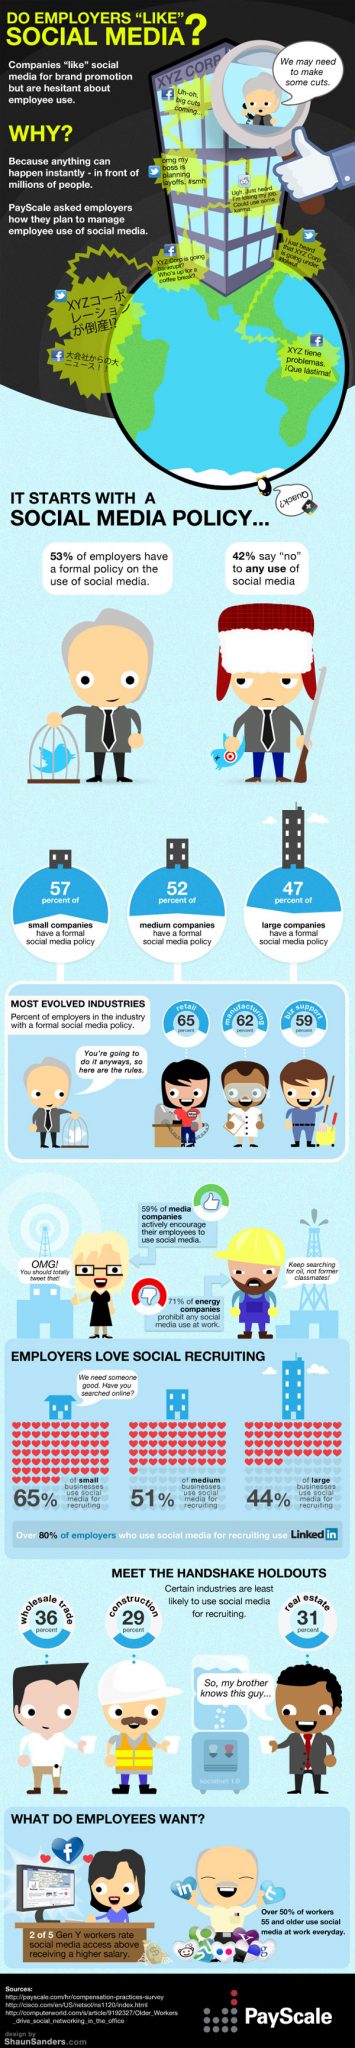 PayScale social media infographic